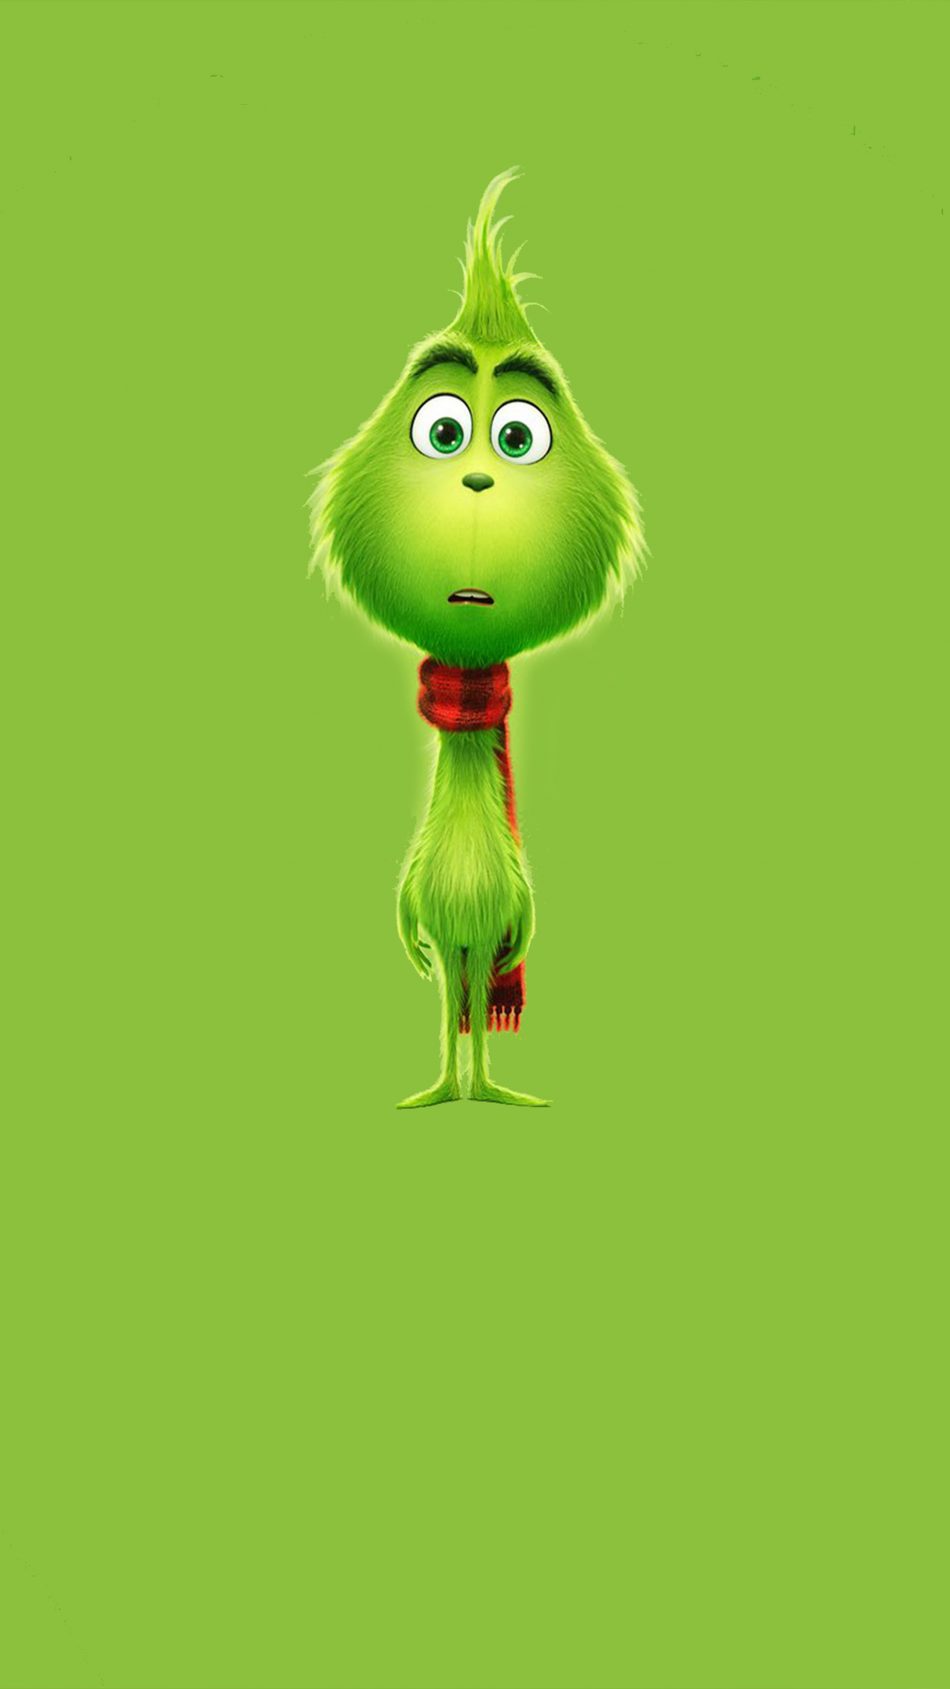 The Grinch Movie 2018 4K Ultra HD Mobile Wallpaper